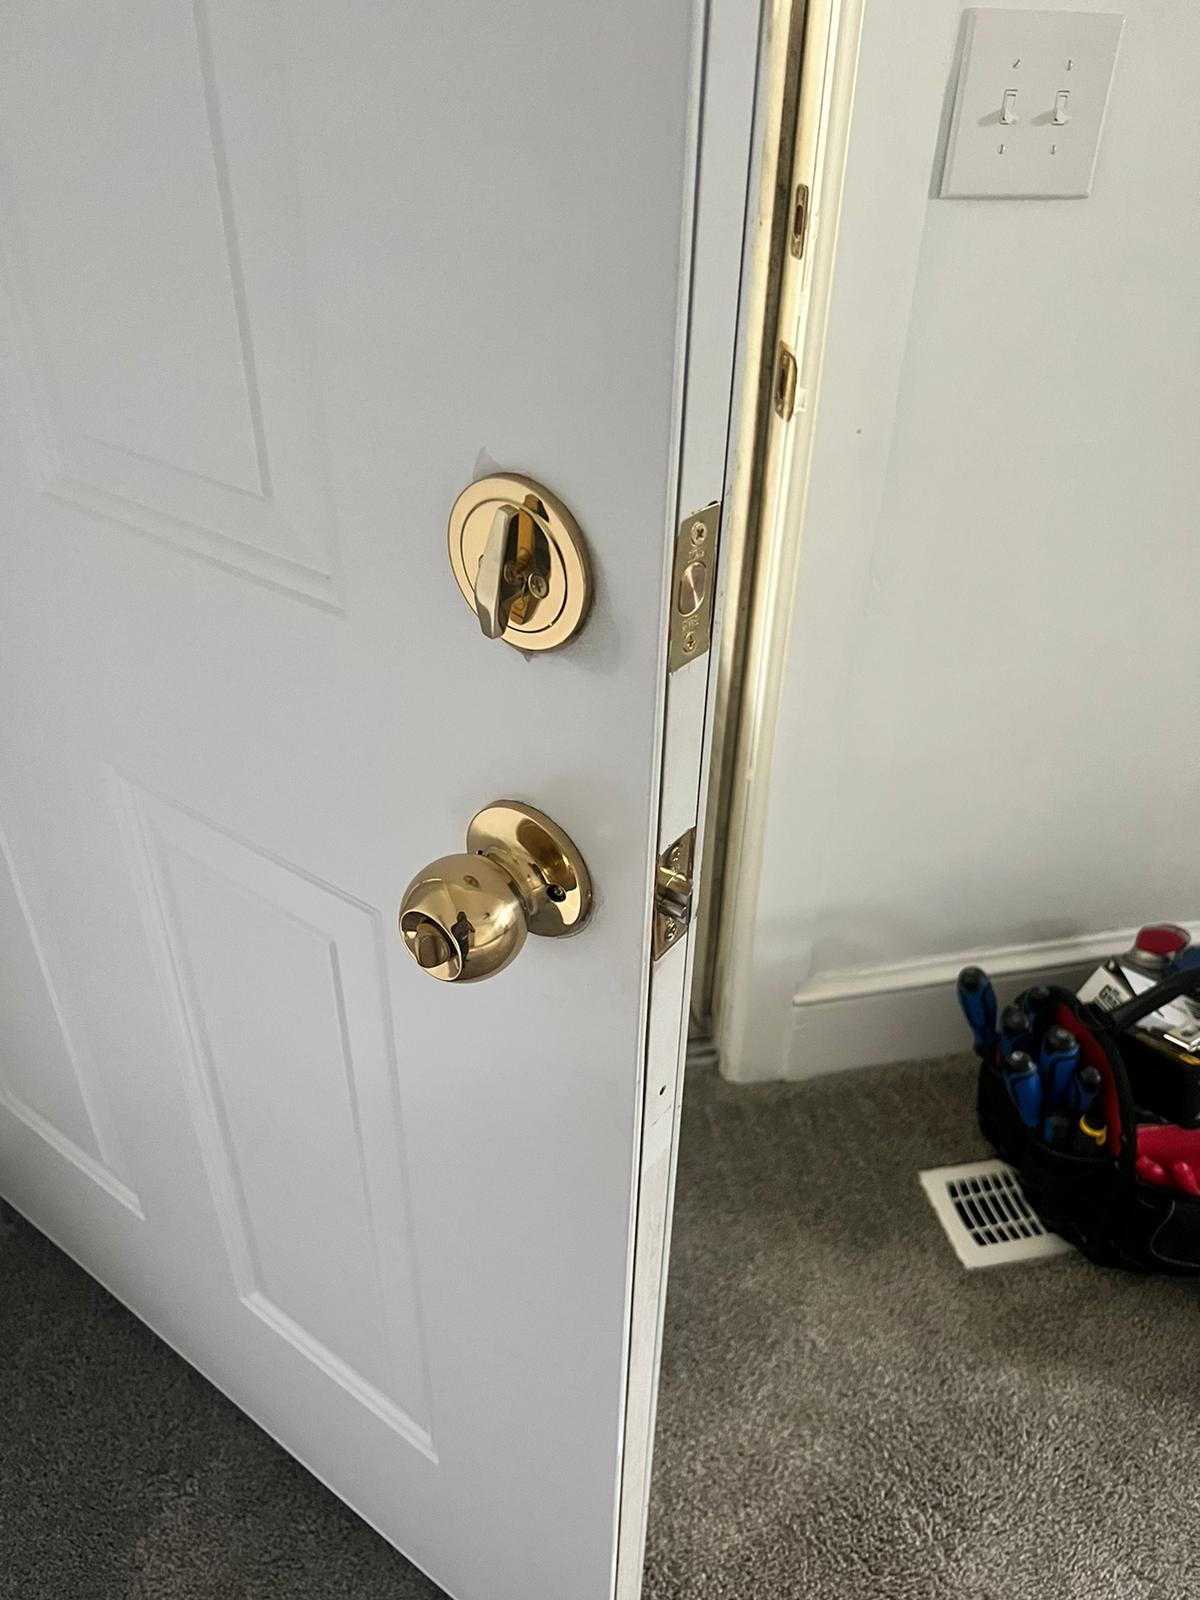 Types of locks we work with in Charlotte NC (3)